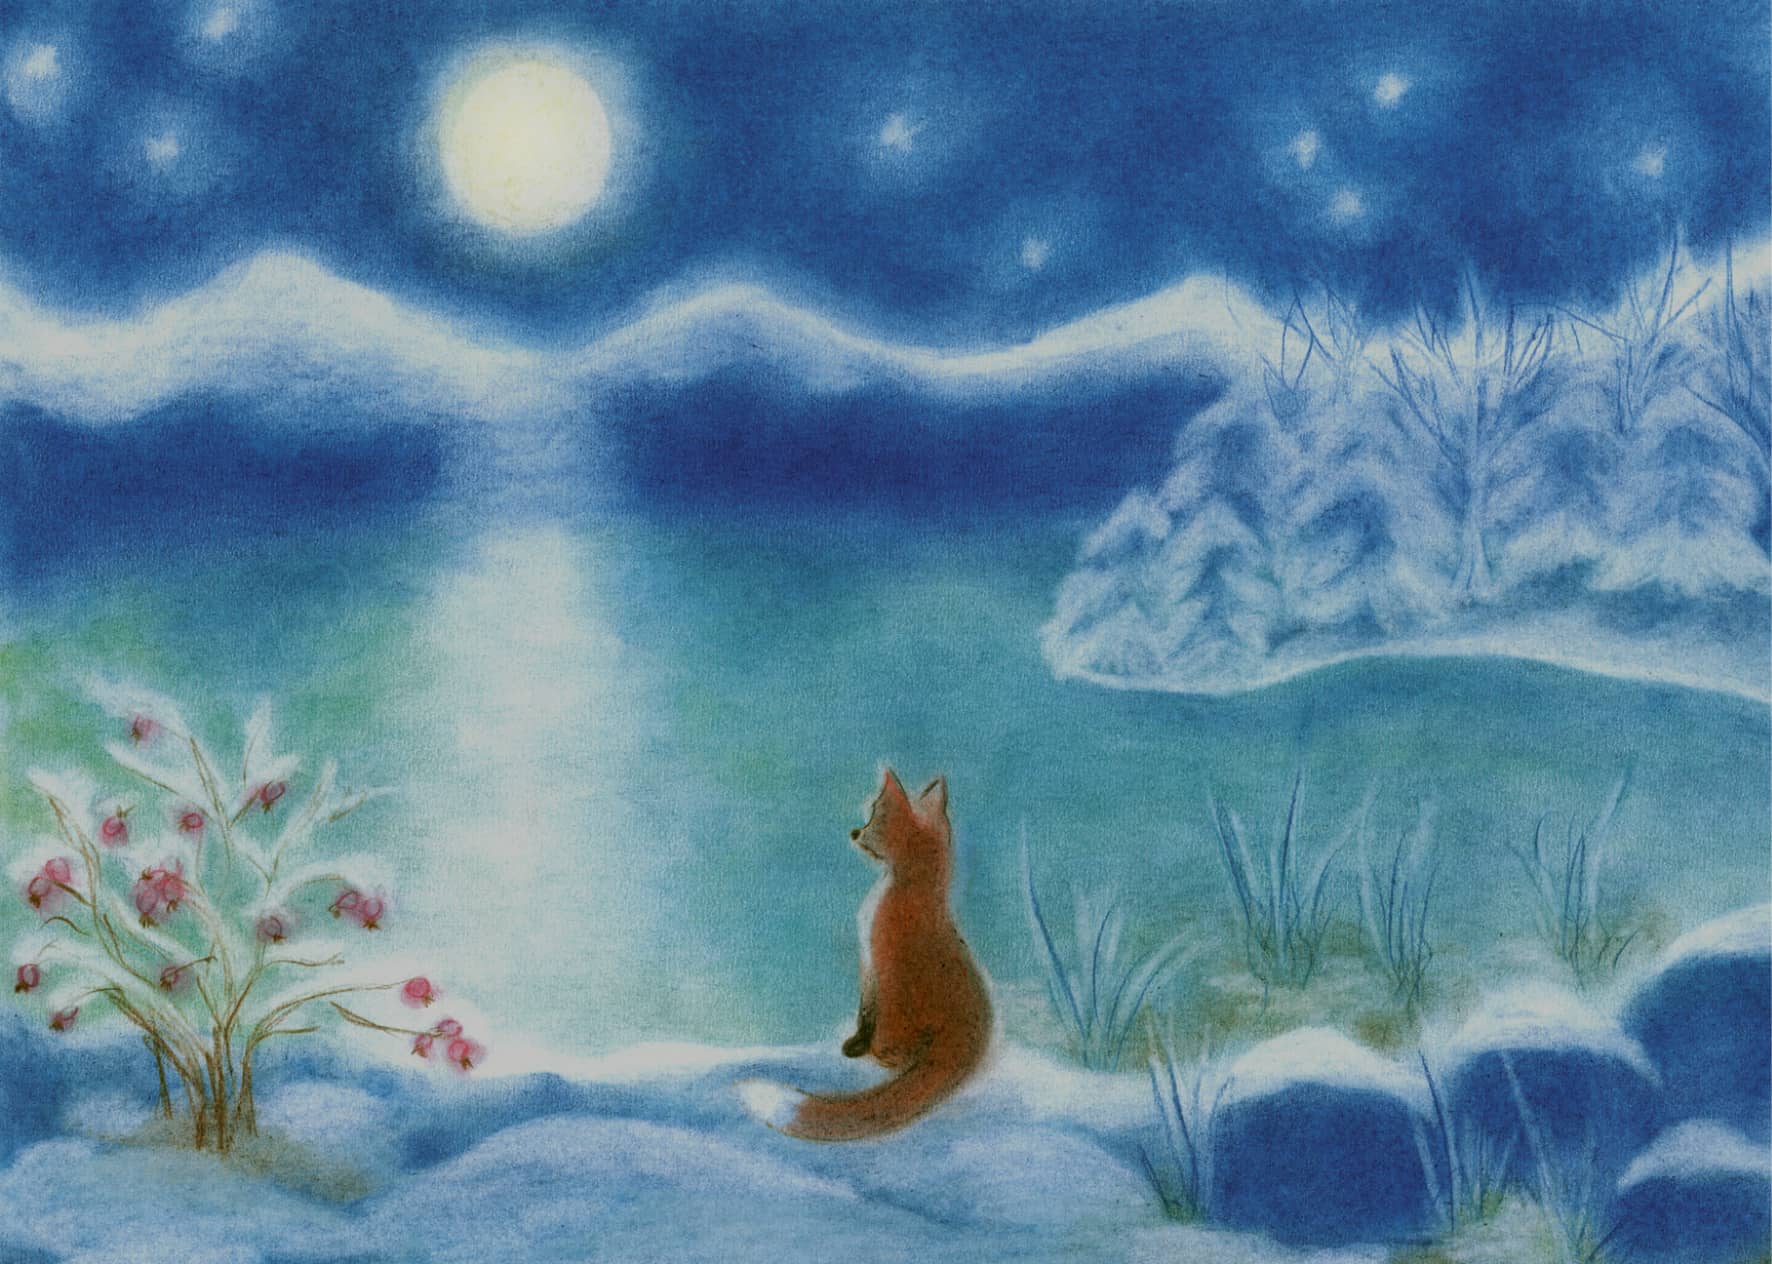 Seccorell postcard "Fox at the winter lake" with idyllic snowy landscape and moonlight reflection.